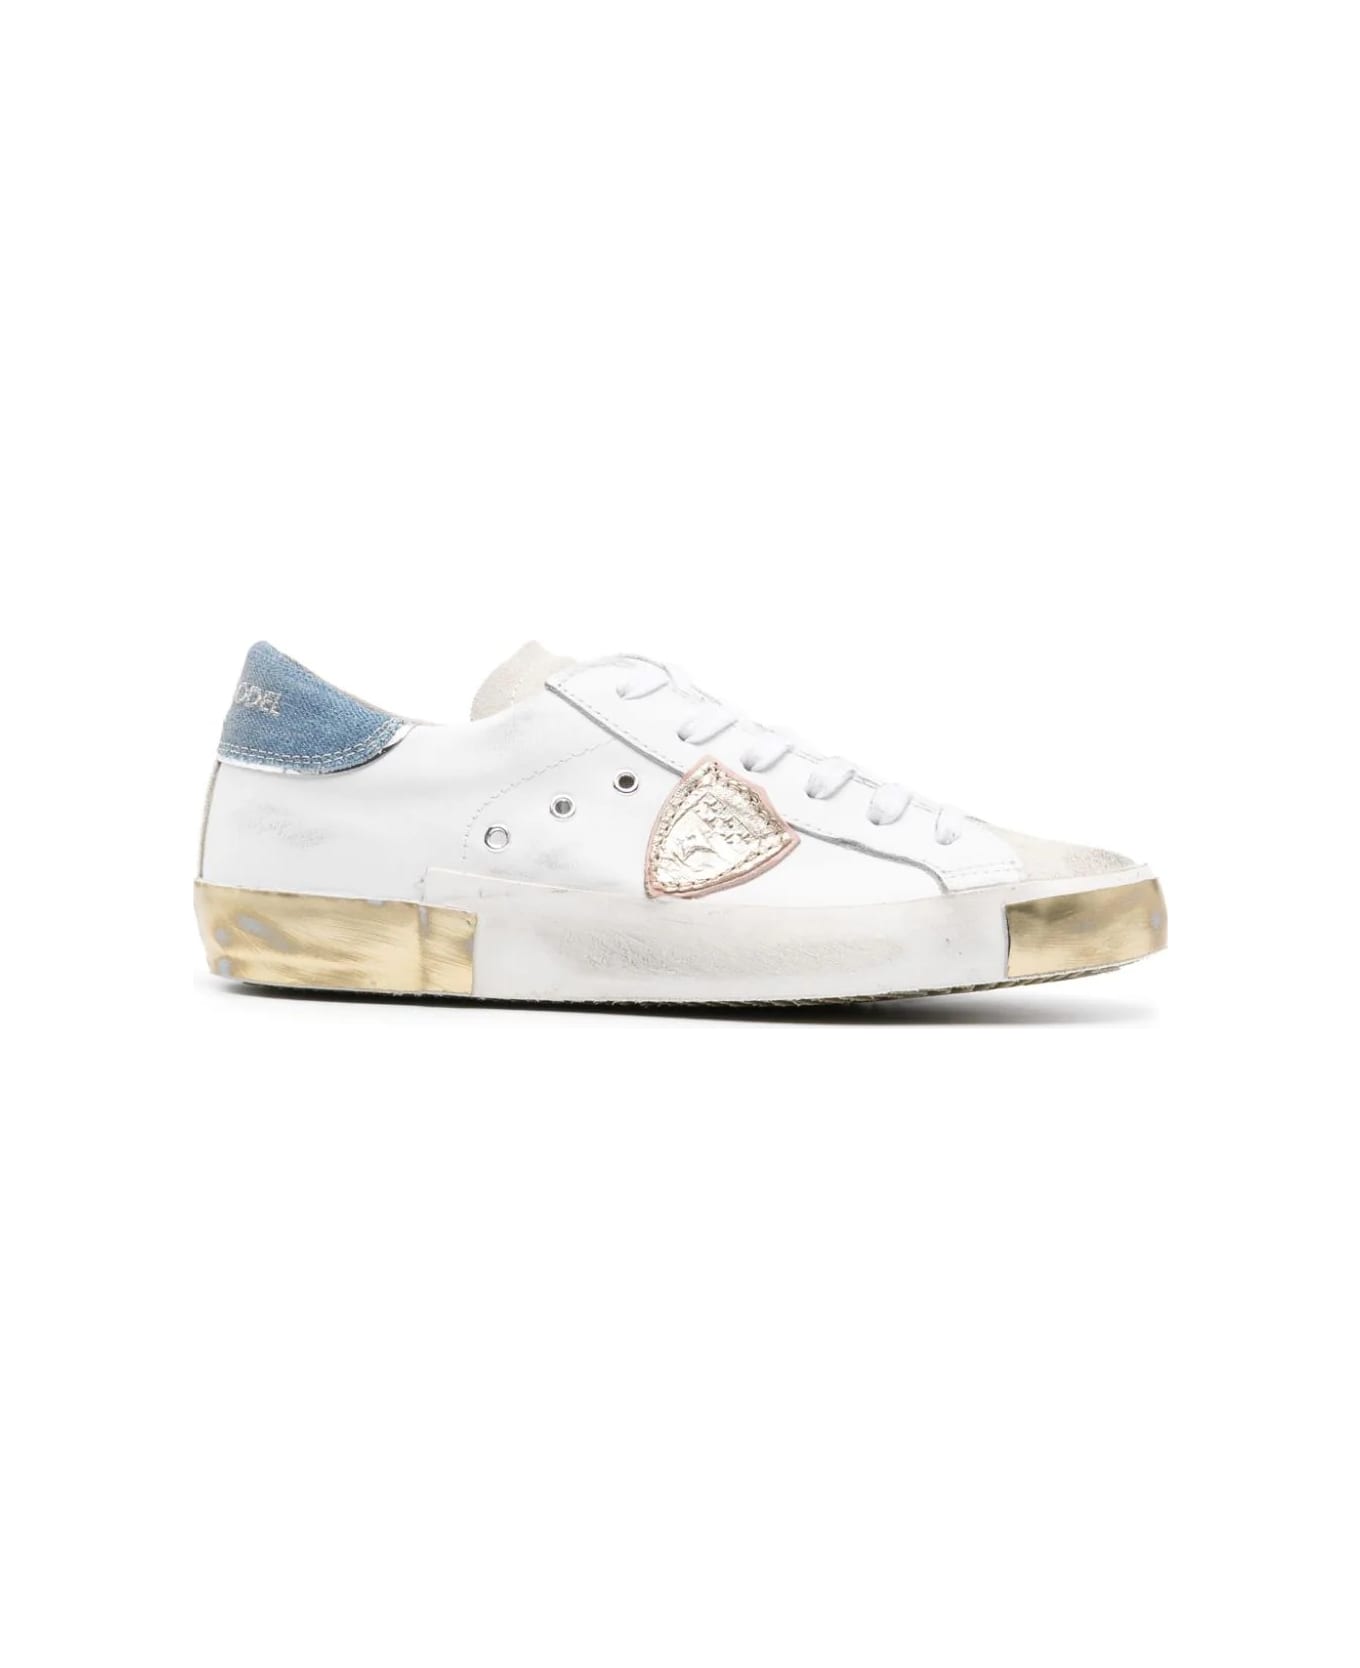 Philippe Model Prsx Low Sneakers - White And Light Blue - Blanc Azuk